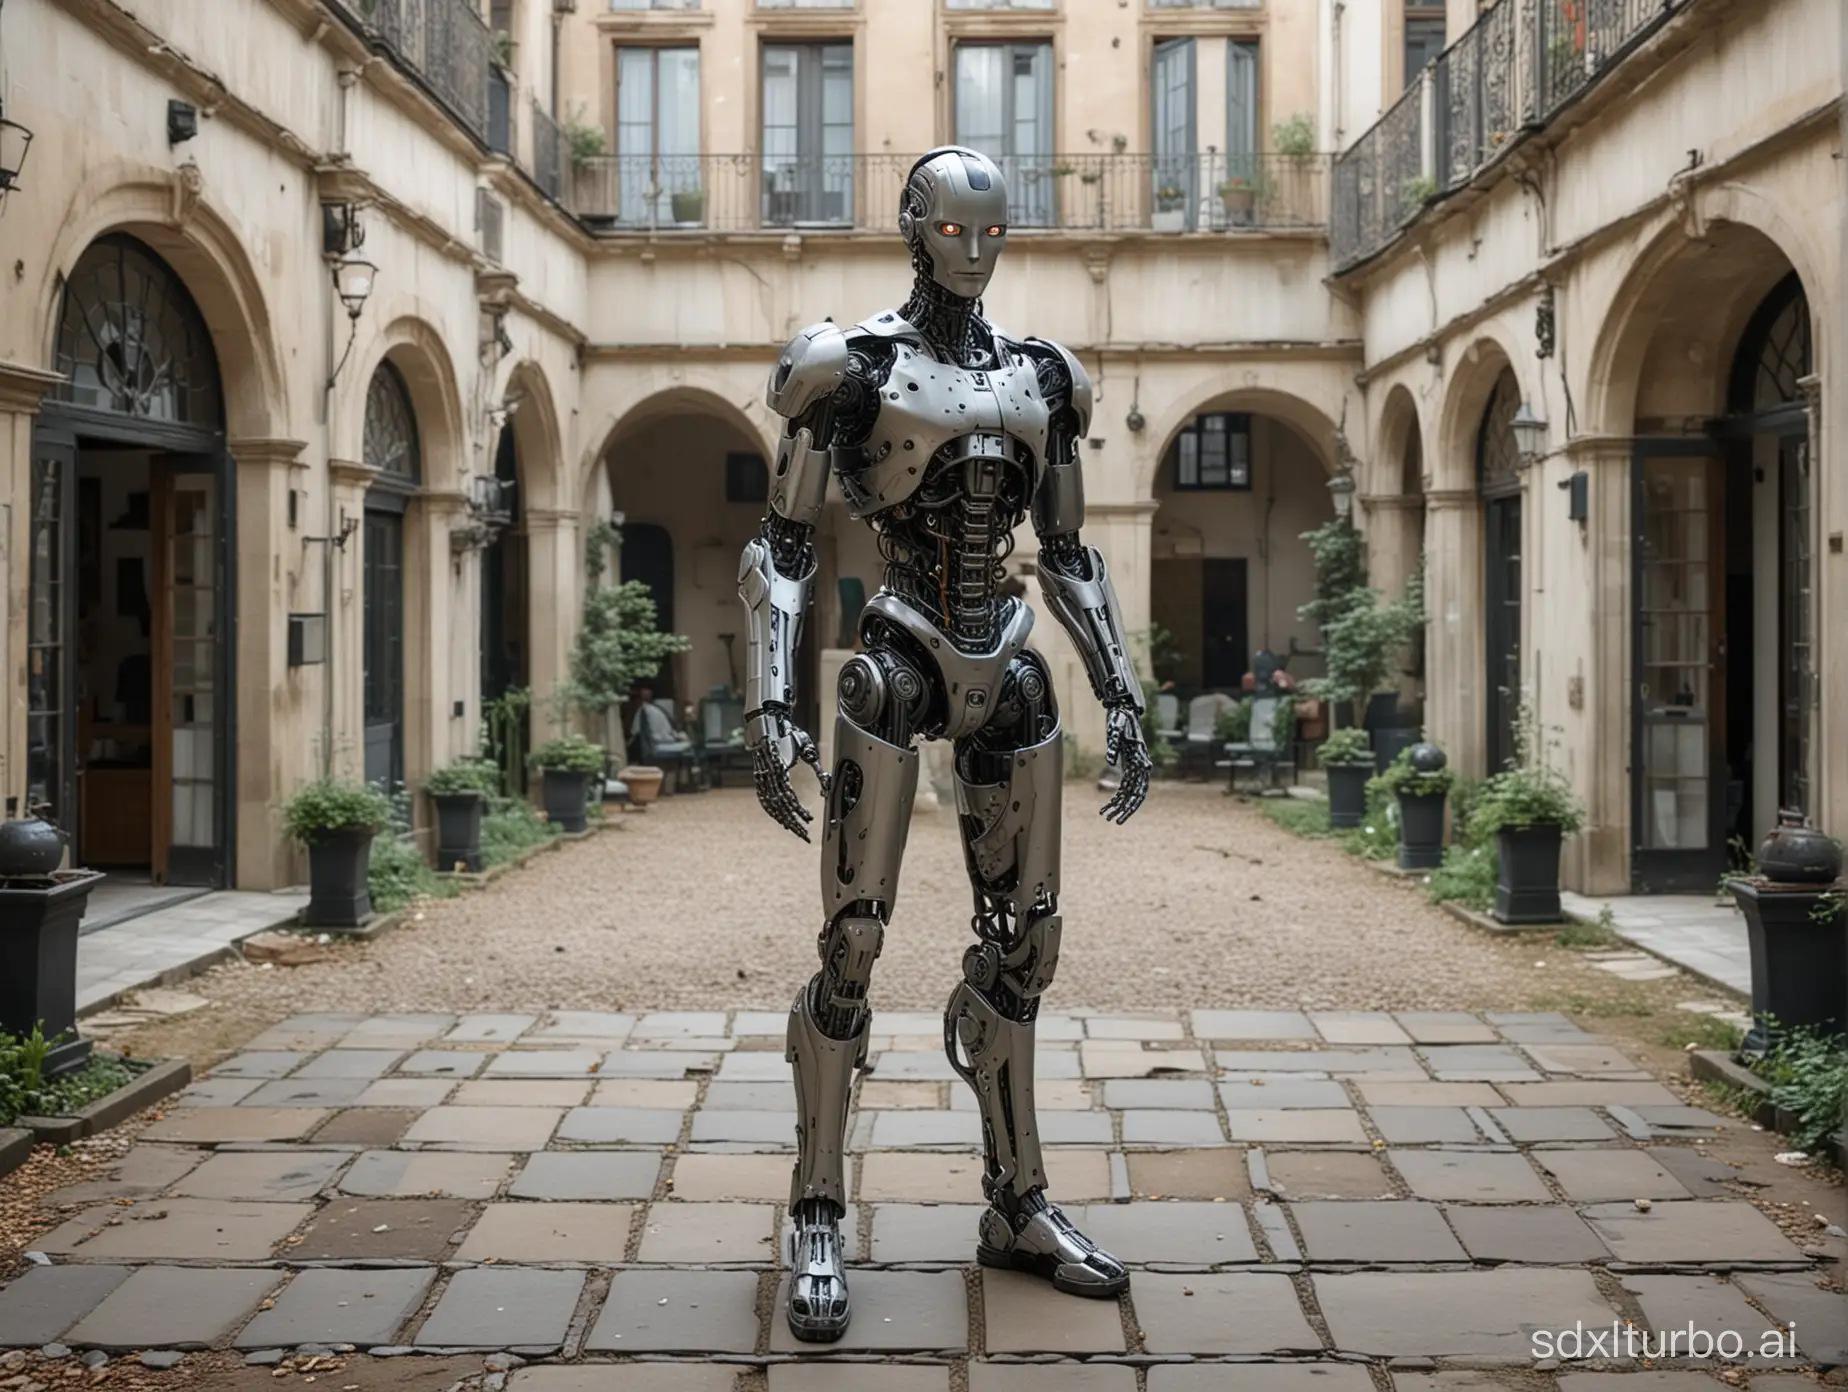 Depict an AI boyfriend, who has both mechanical and human parts, standing in the middle of the courtyard